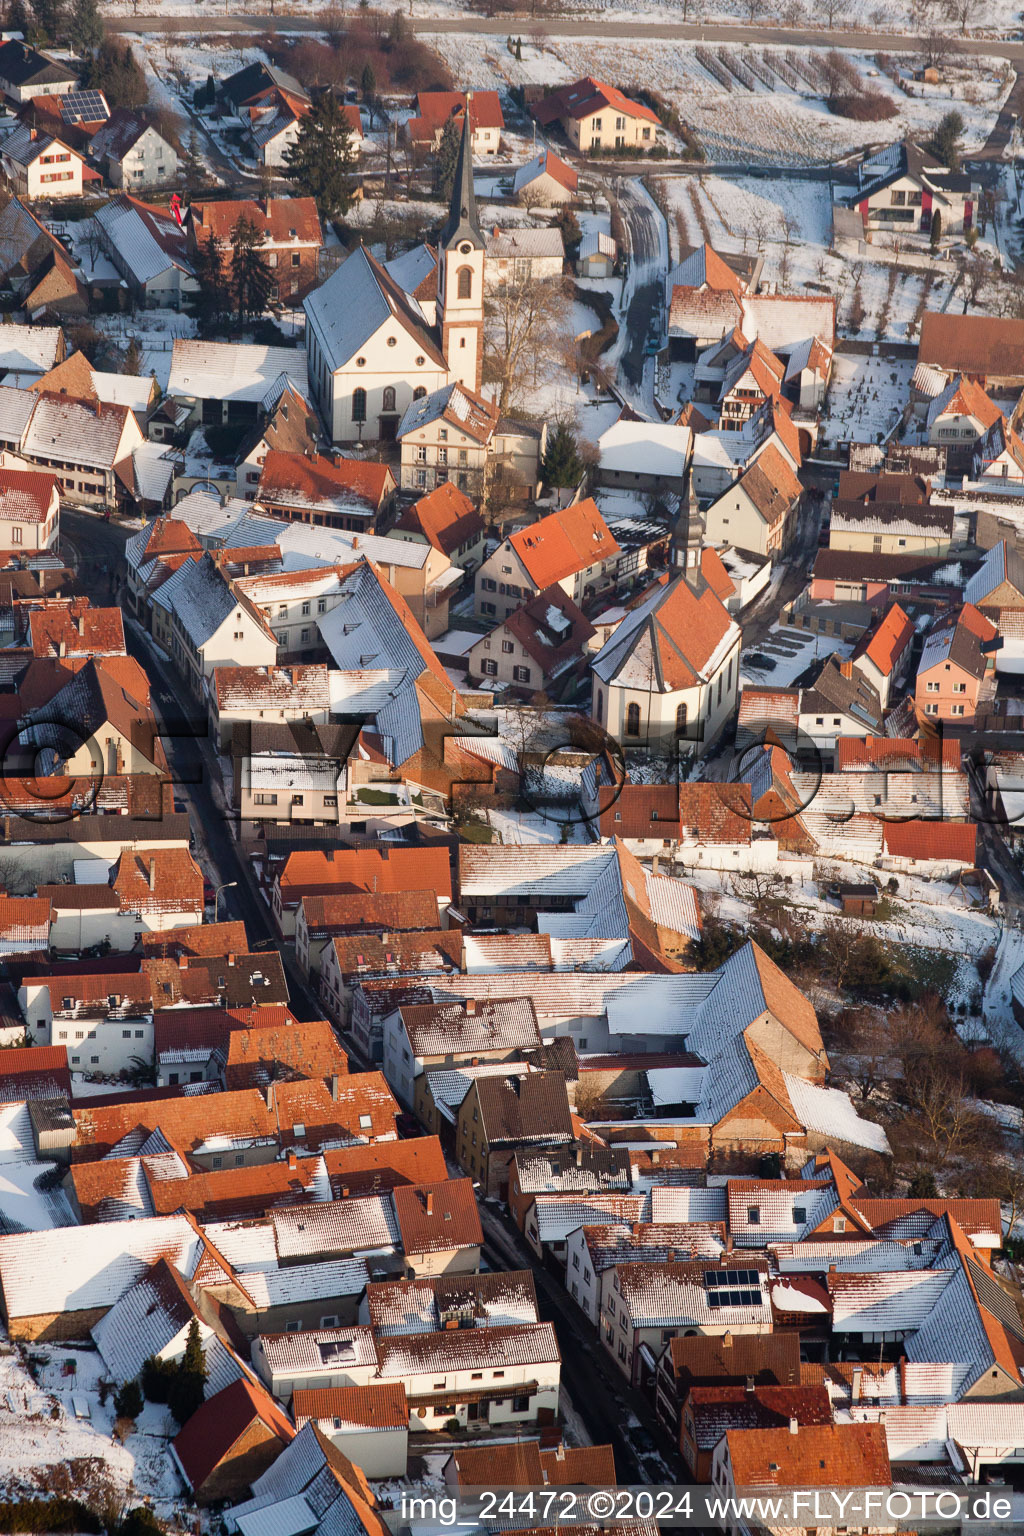 Wintry snowy Village view in Goecklingen in the state Rhineland-Palatinate, Germany seen from above